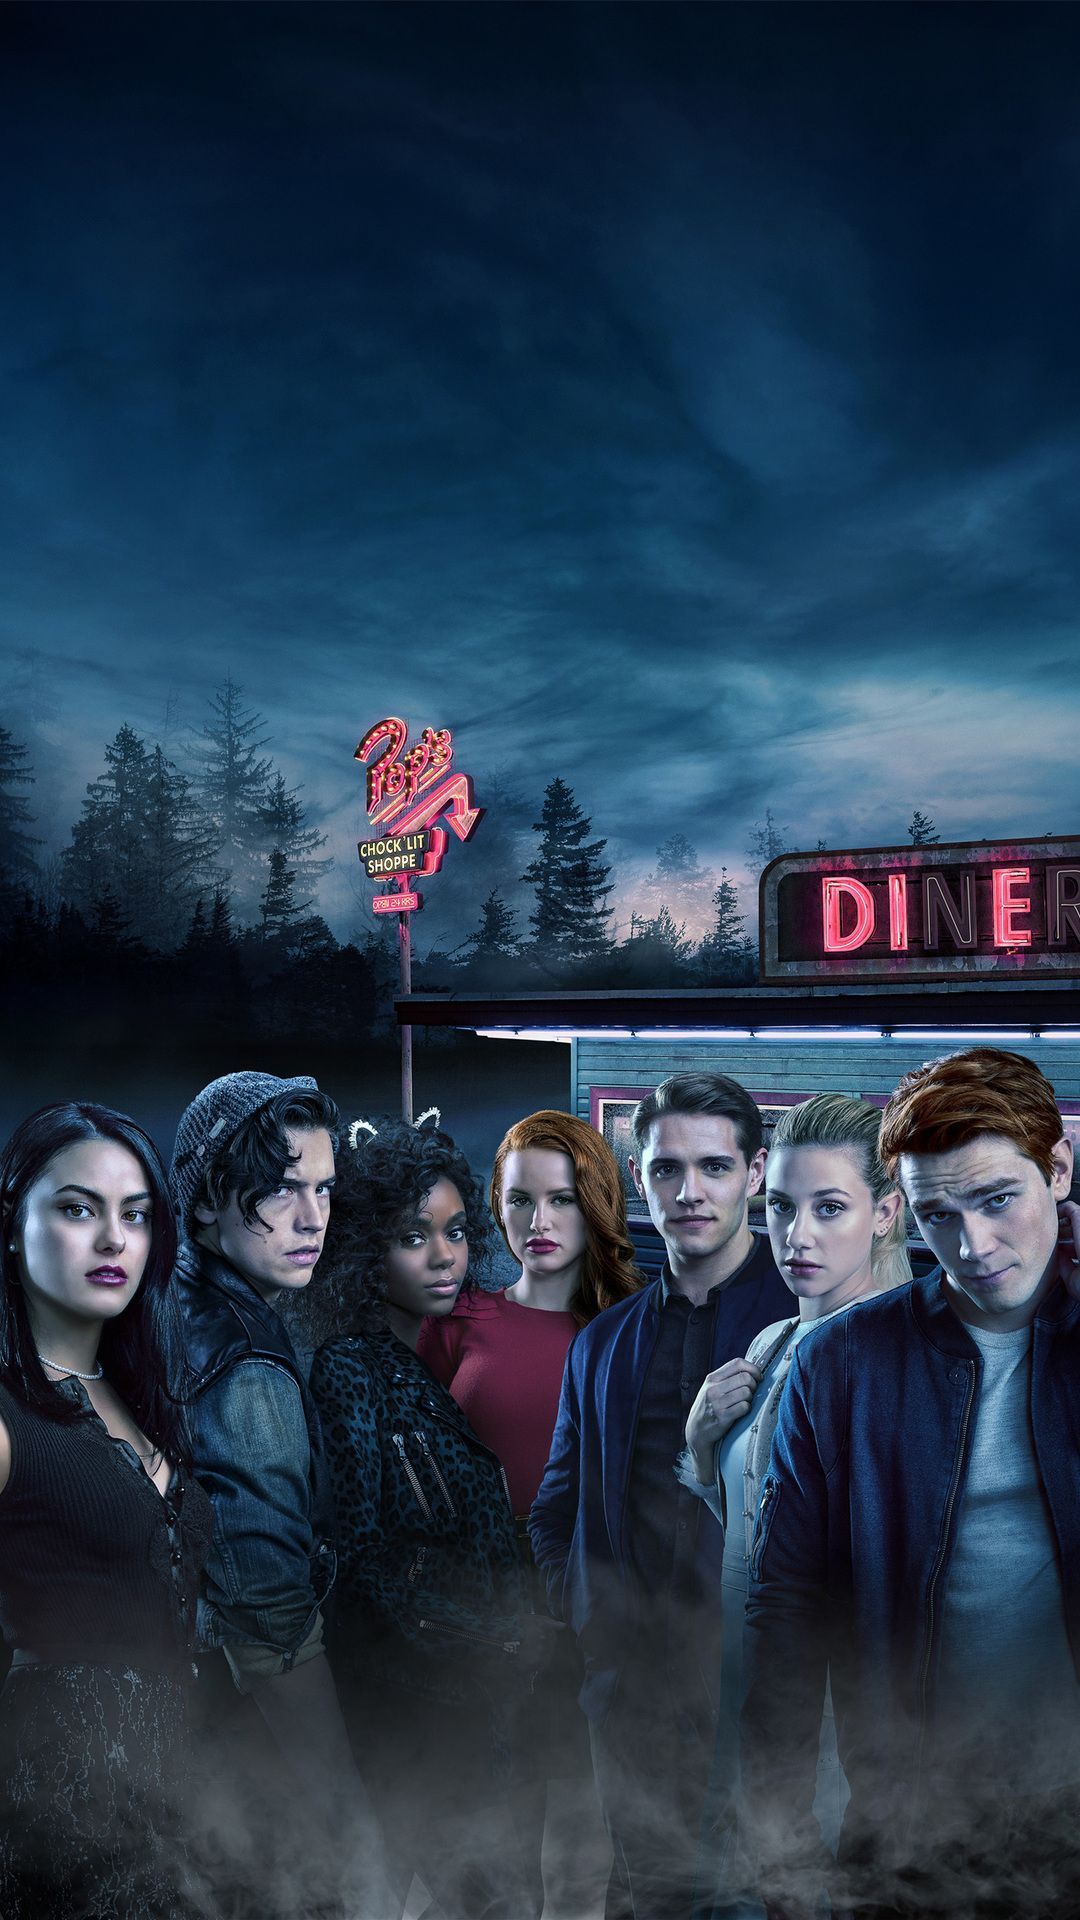 Riverdale iPhone 8 wallpaper with high-resolution 1080x1920 pixel. You can use this wallpaper for your iPhone 5, 6, 7, 8, X, XS, XR backgrounds, Mobile Screensaver, or iPad Lock Screen - Riverdale